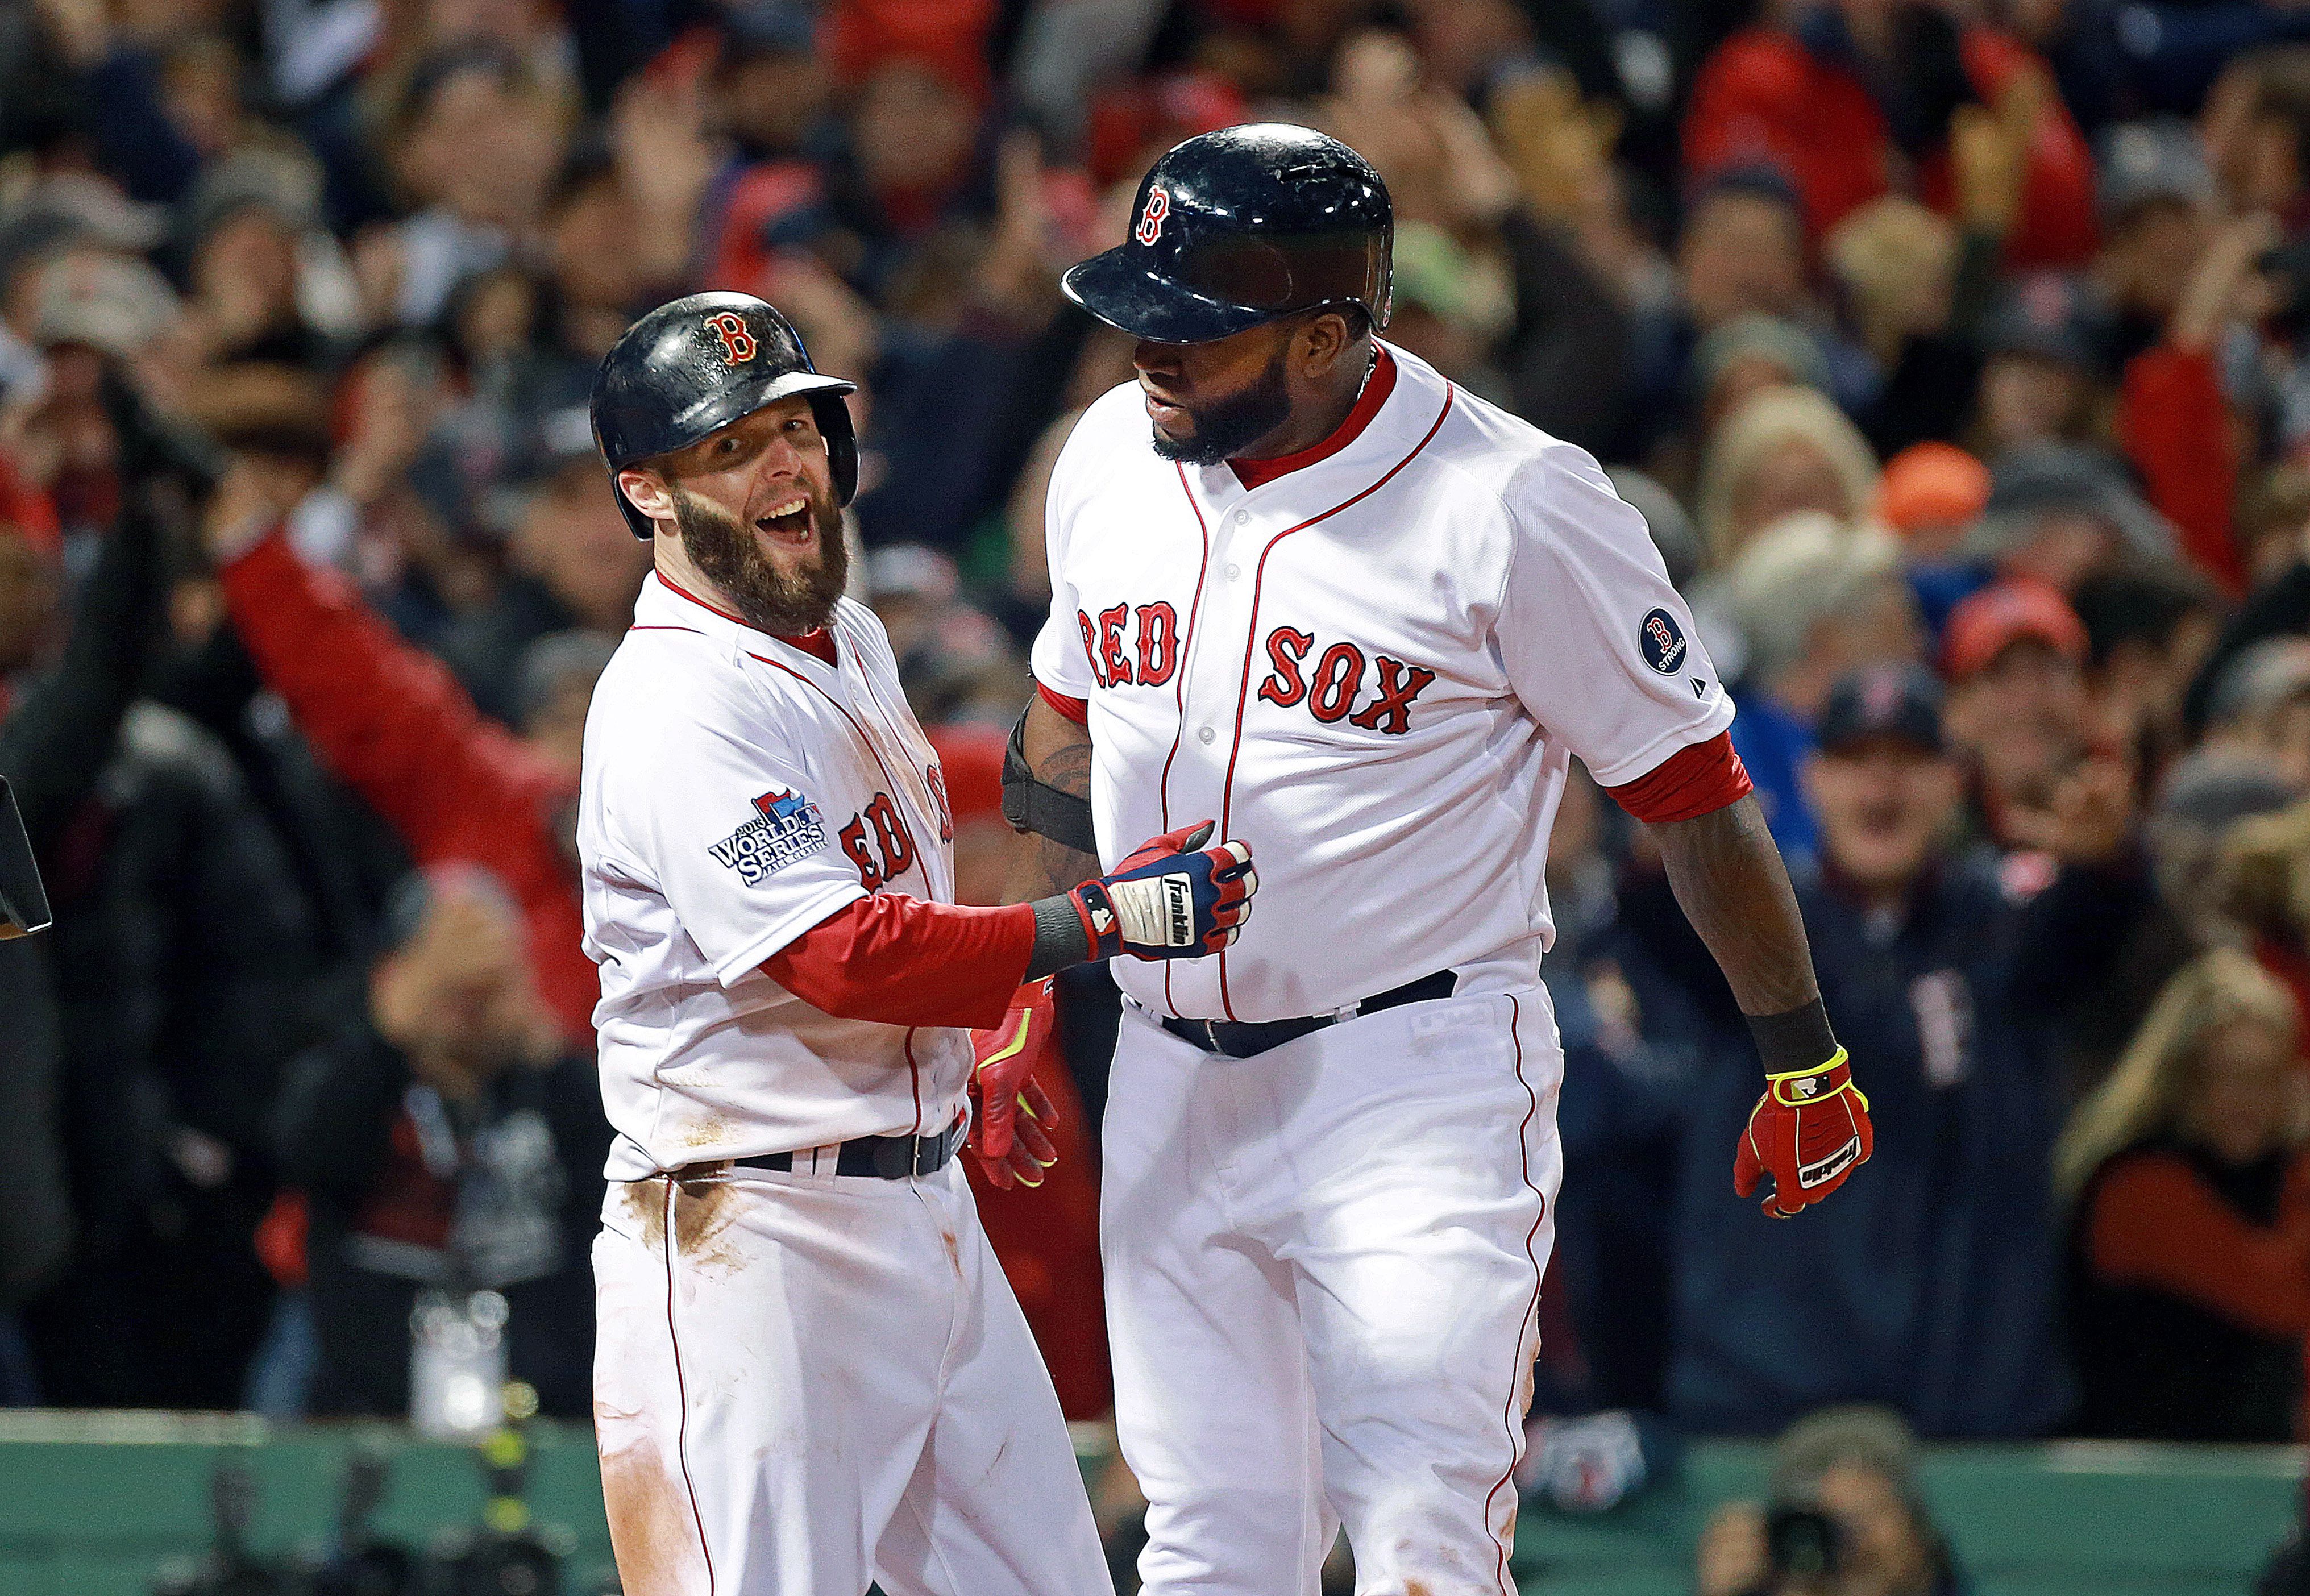 He played with a little chip on his shoulder': Dustin Pedroia's former  teammates, managers react to his retirement - The Boston Globe